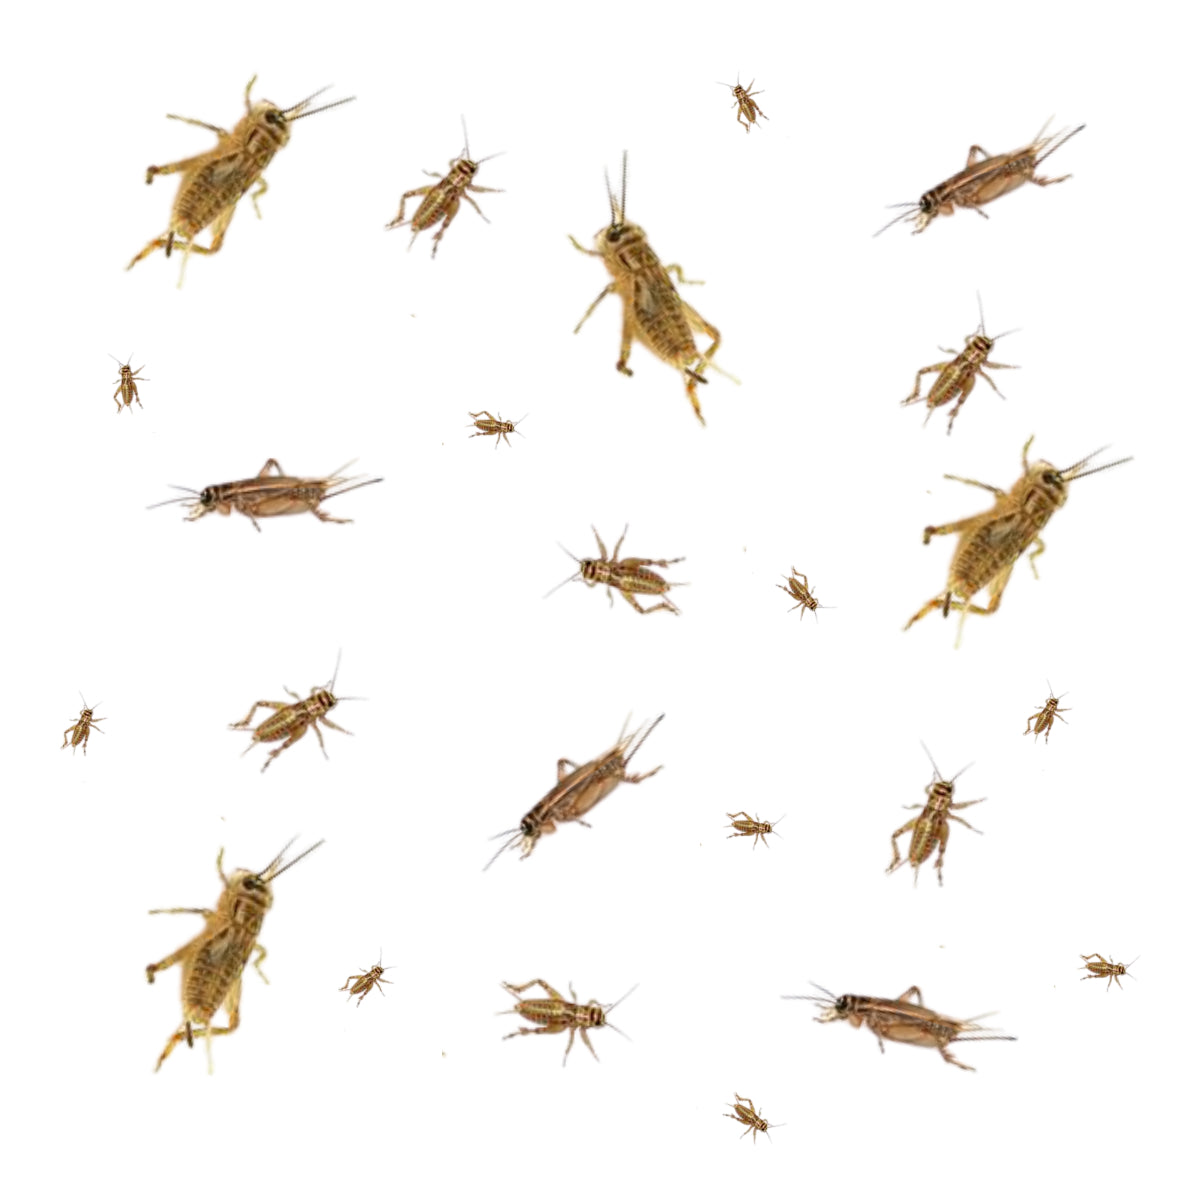 Live Crickets For Sale For Reptiles – Big Apple Herp - Reptiles